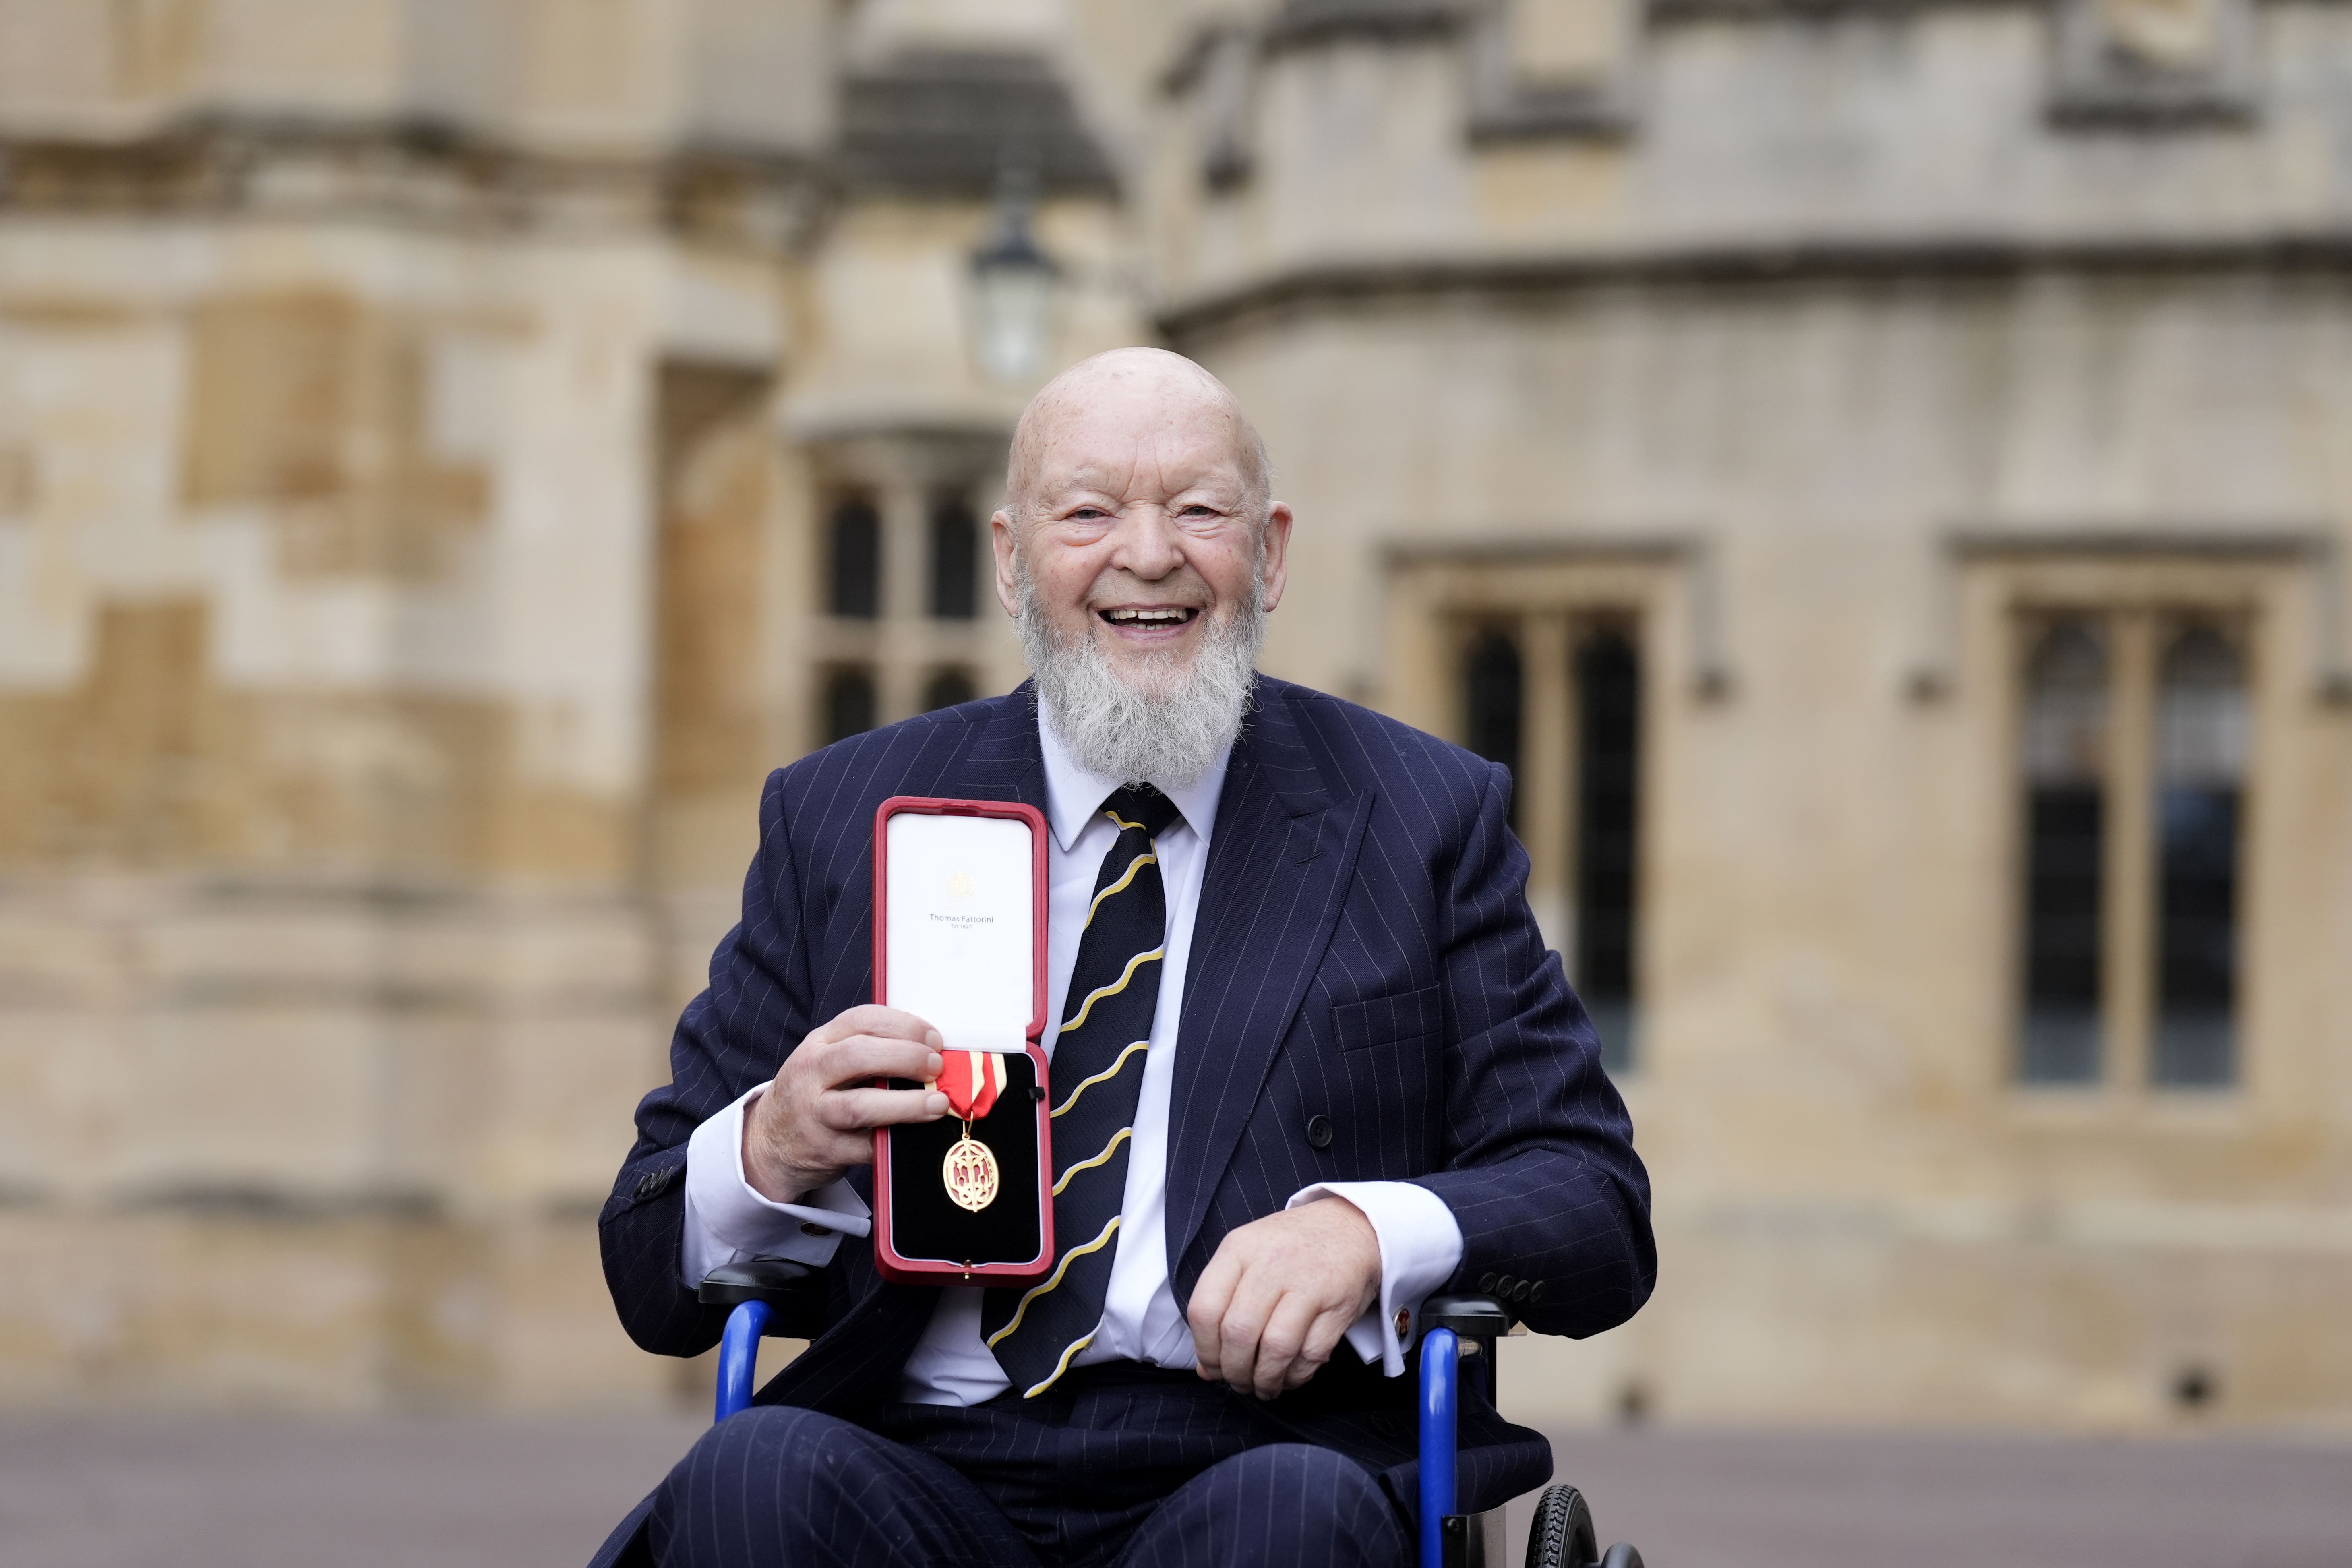 Sir Michael Eavis knighted at Windsor Castle (Andrew Matthews/PA)